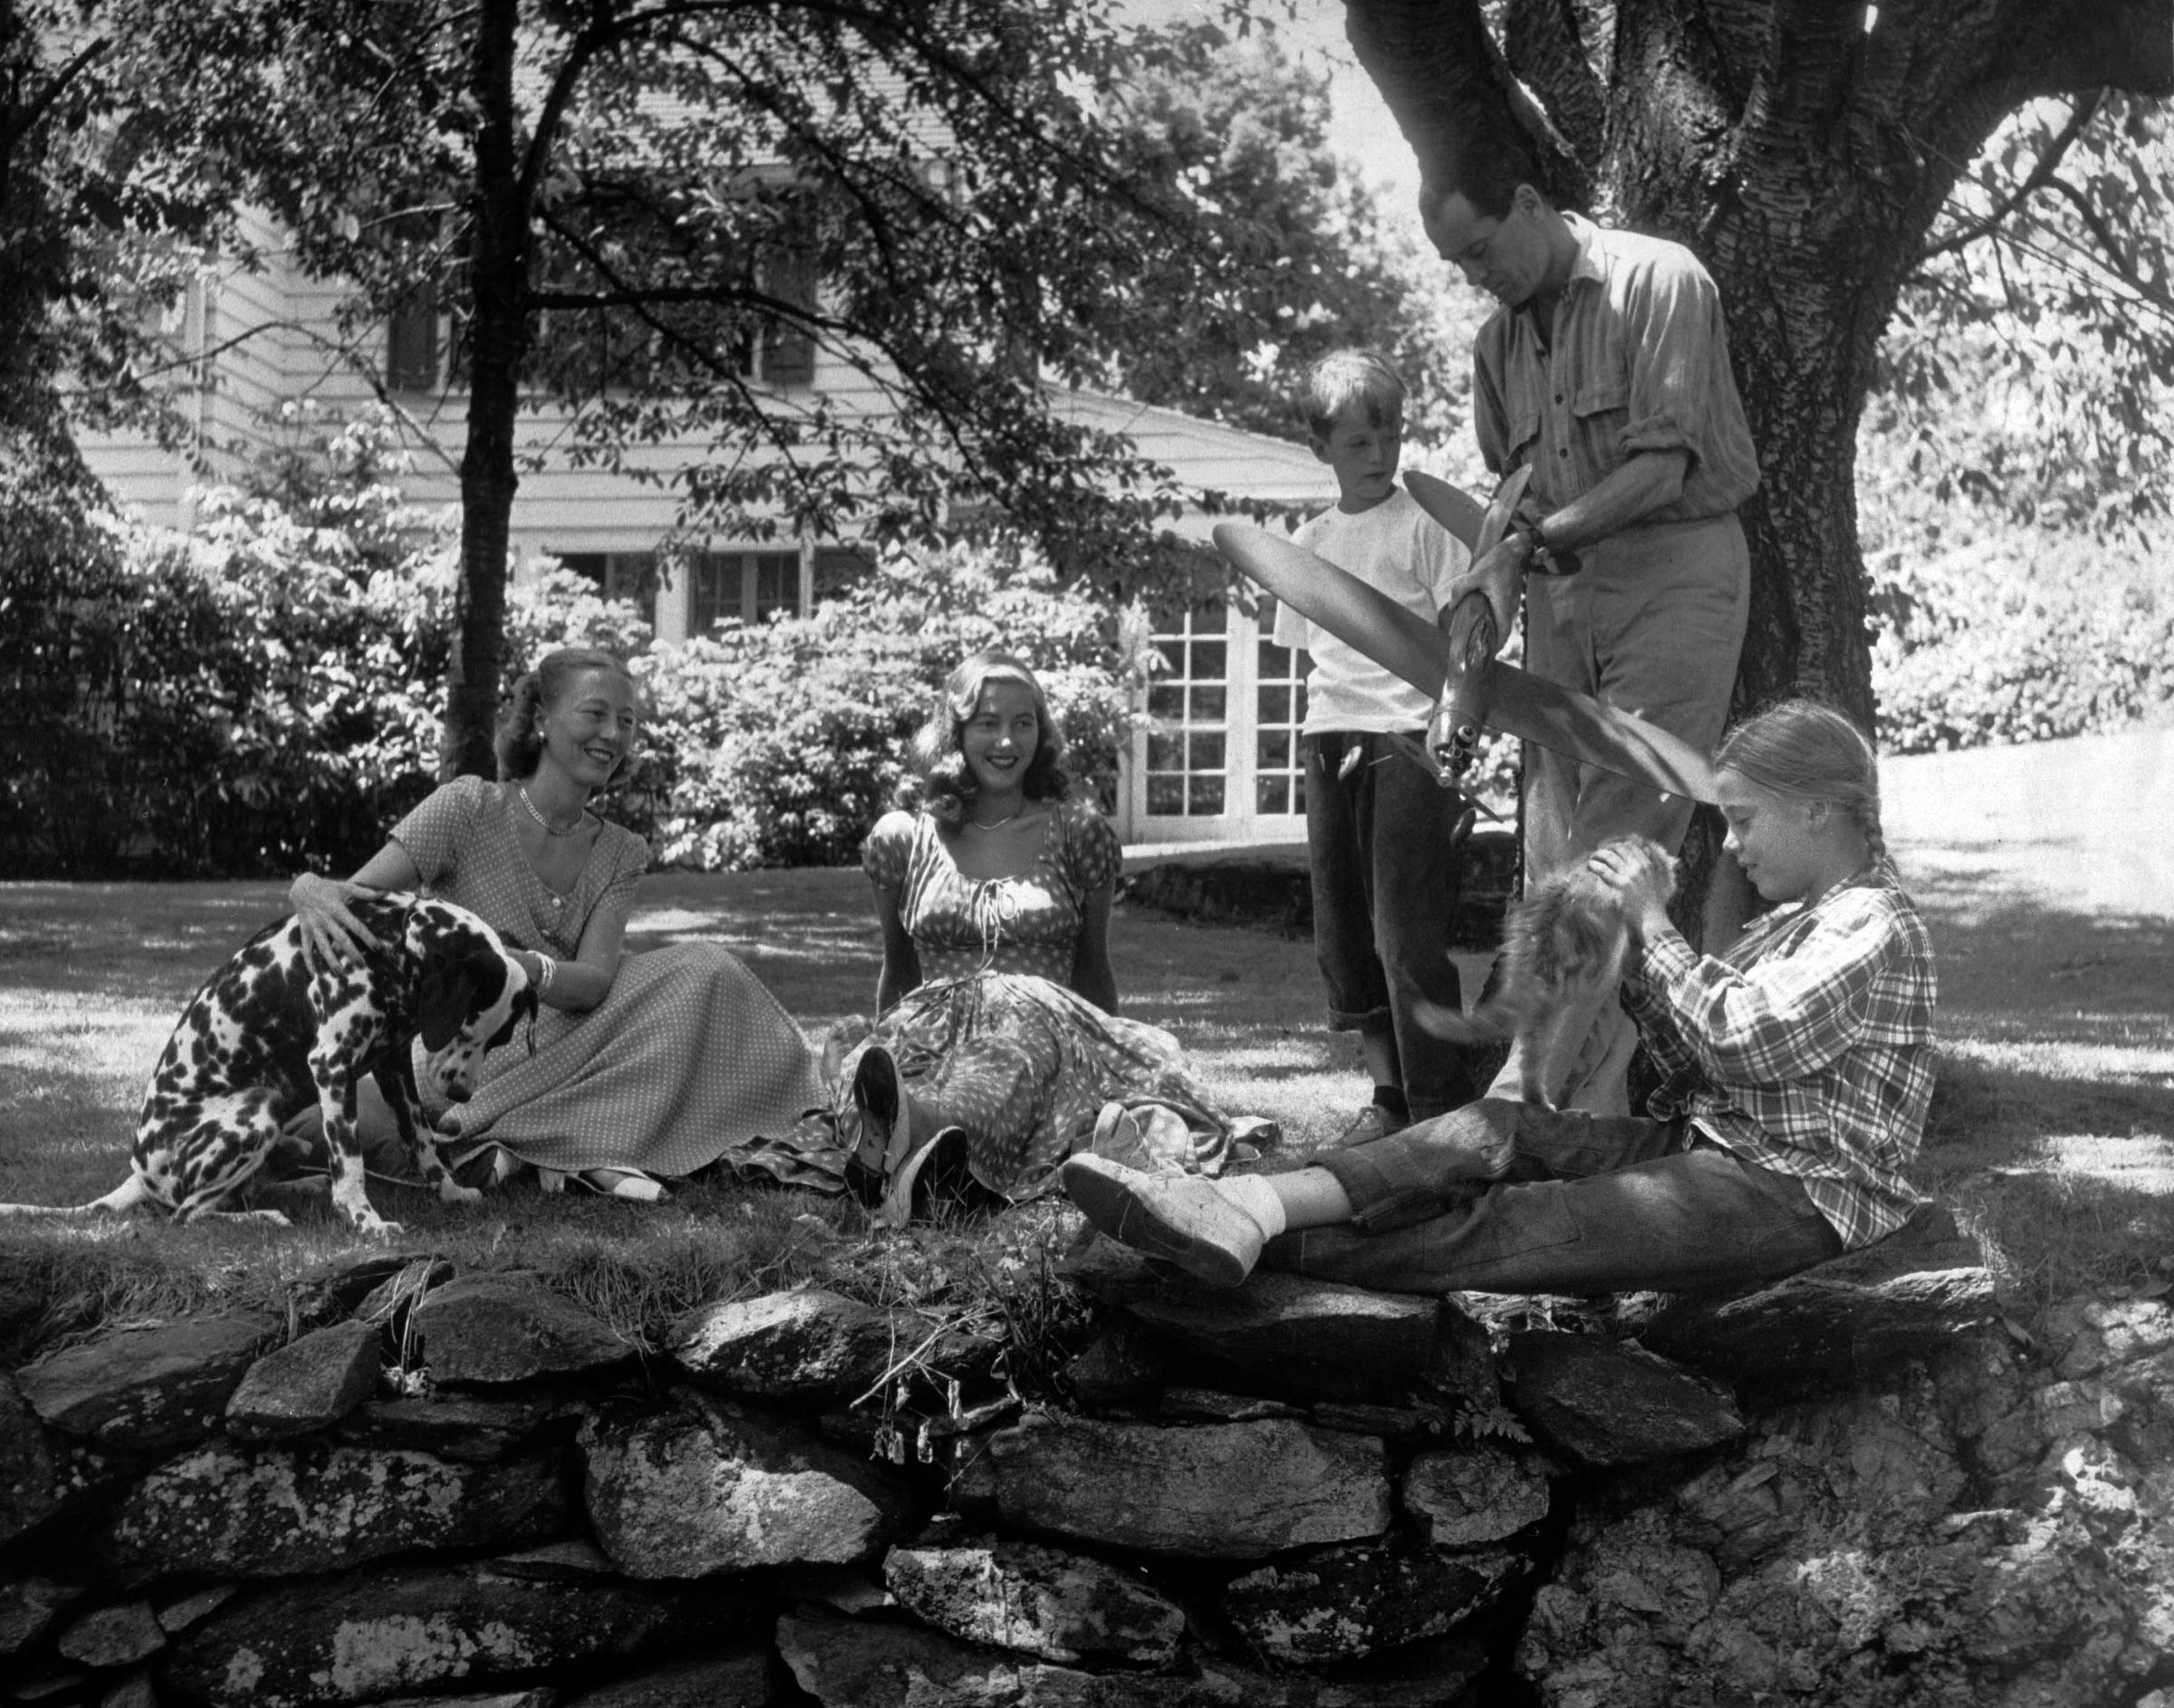 Henry Fonda shows a toy plane to son Peter Fonda while daughter Jane Fonda plays with cat, stepdaughter Frances Brokaw and wife Frances watches in yard at home in Connecticut in 1948